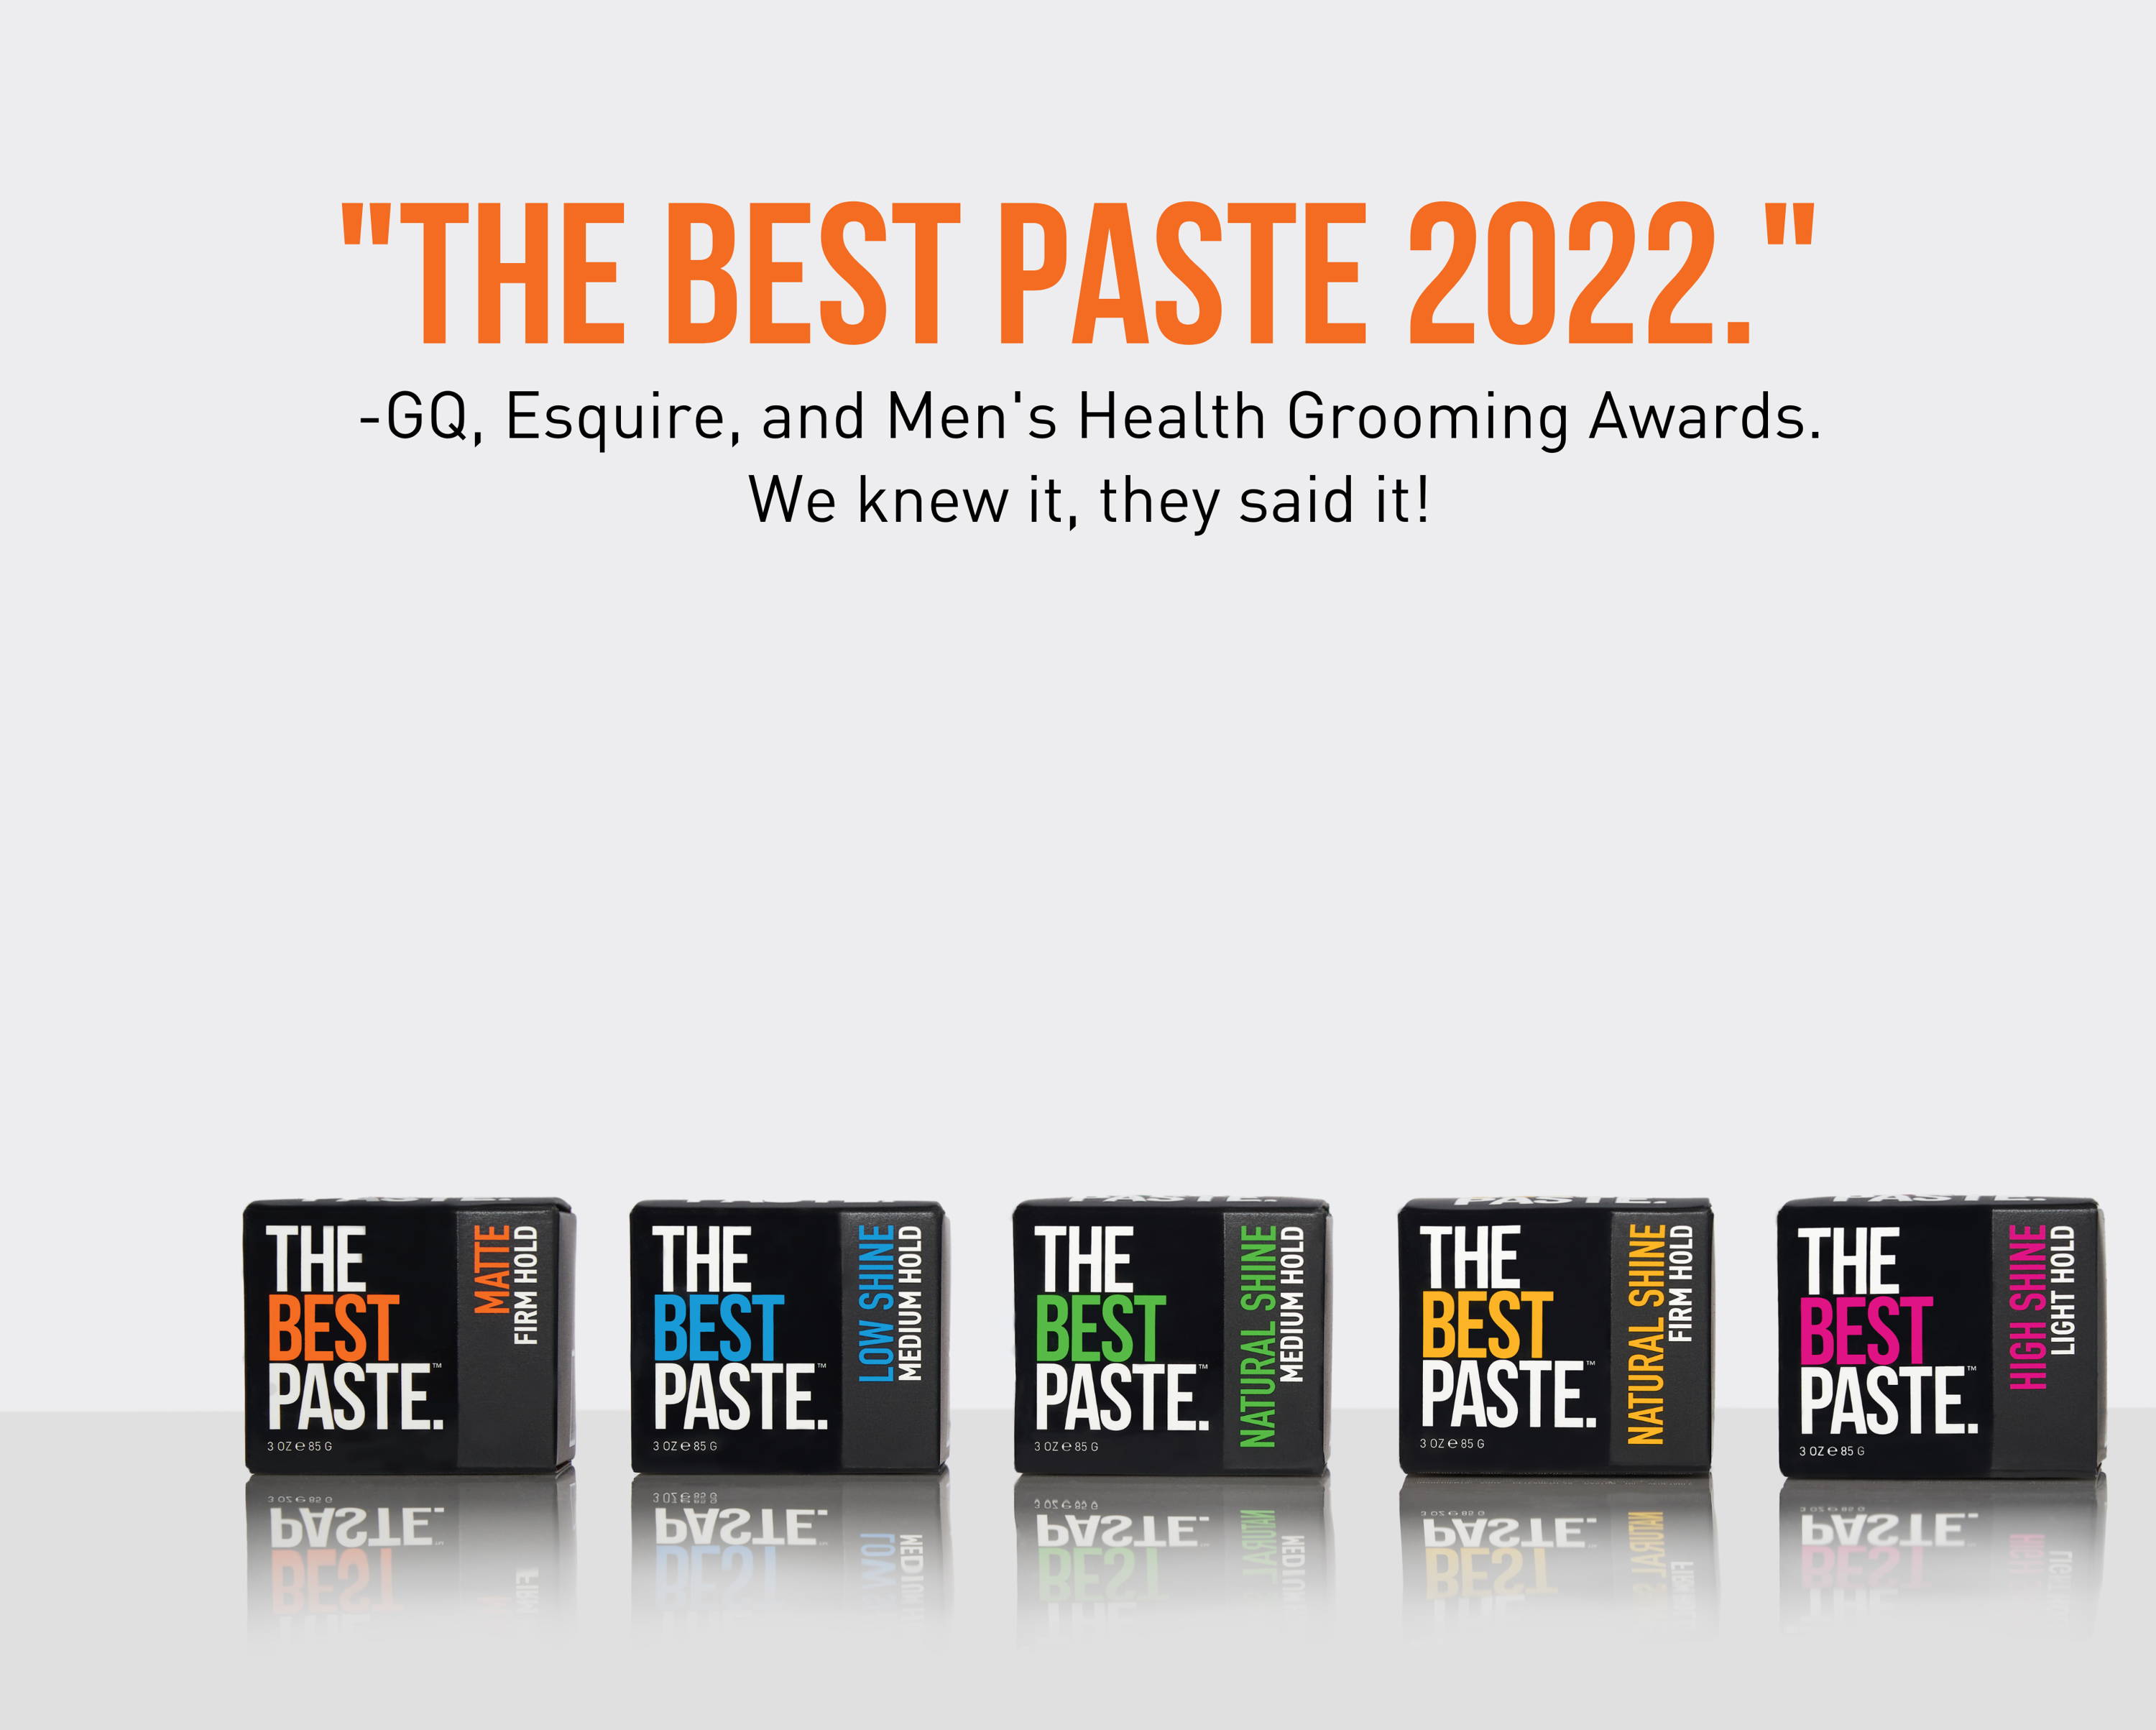 The Best Paste.™ – THE BEST PASTE.™